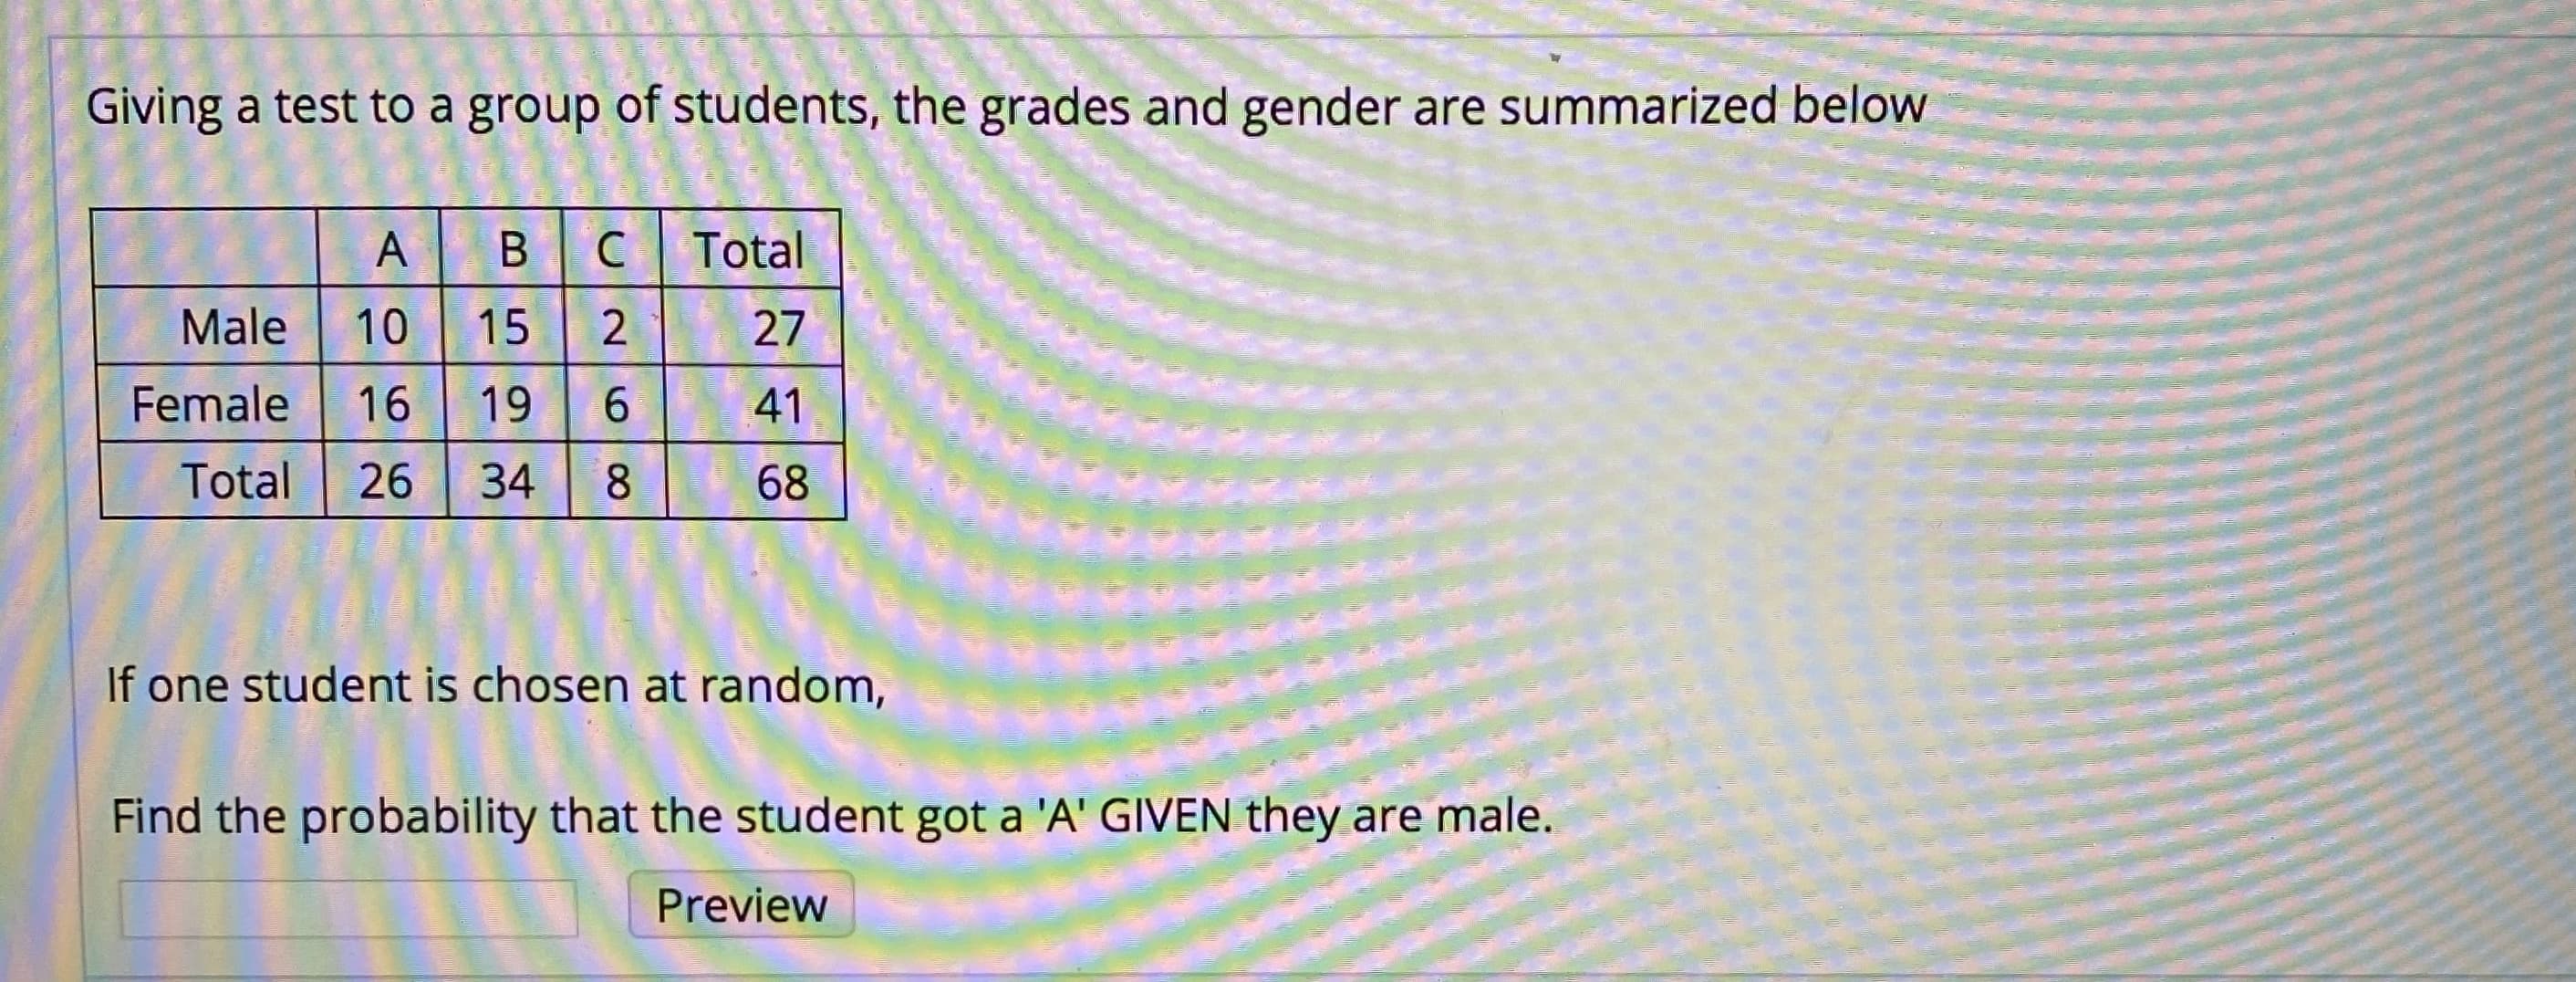 Giving a test to a group of students, the grades and gender are summarized below
Total
Male
10
15
27
Female
16
19
41
Total
26
34
8.
68
If one student is chosen at random,
Find the probability that the student got a 'A' GIVEN they are male.
Preview
